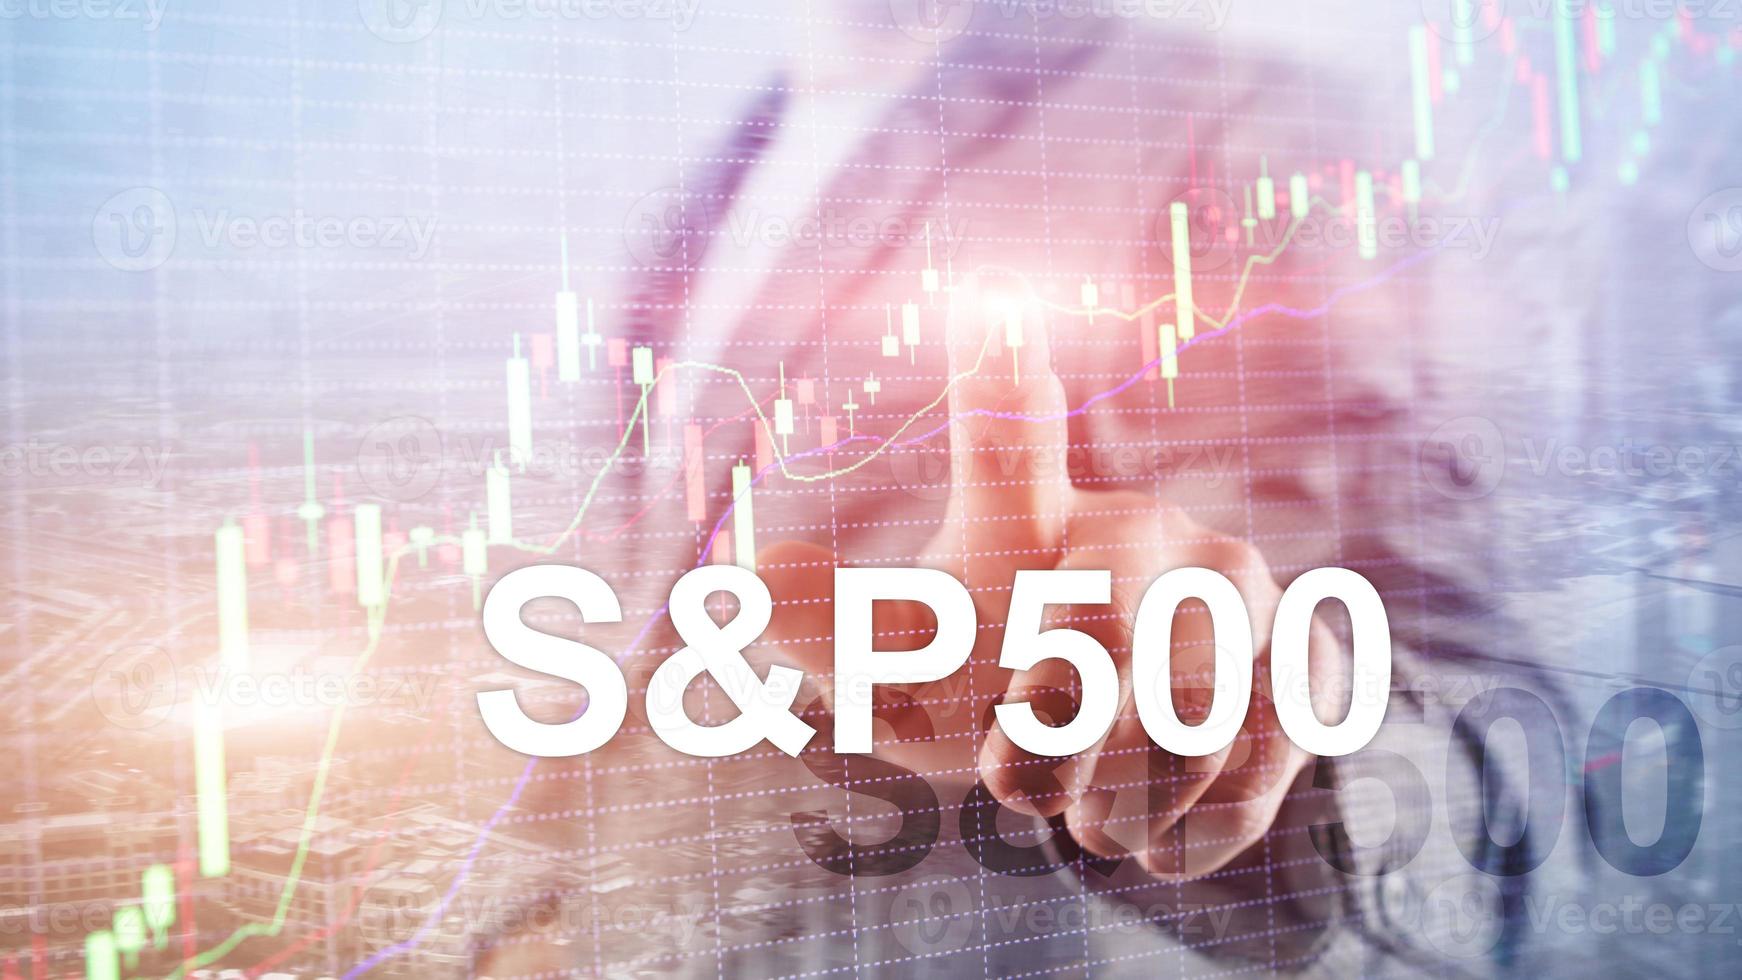 American stock market index S P 500 - SPX. Financial Trading Business concept. photo